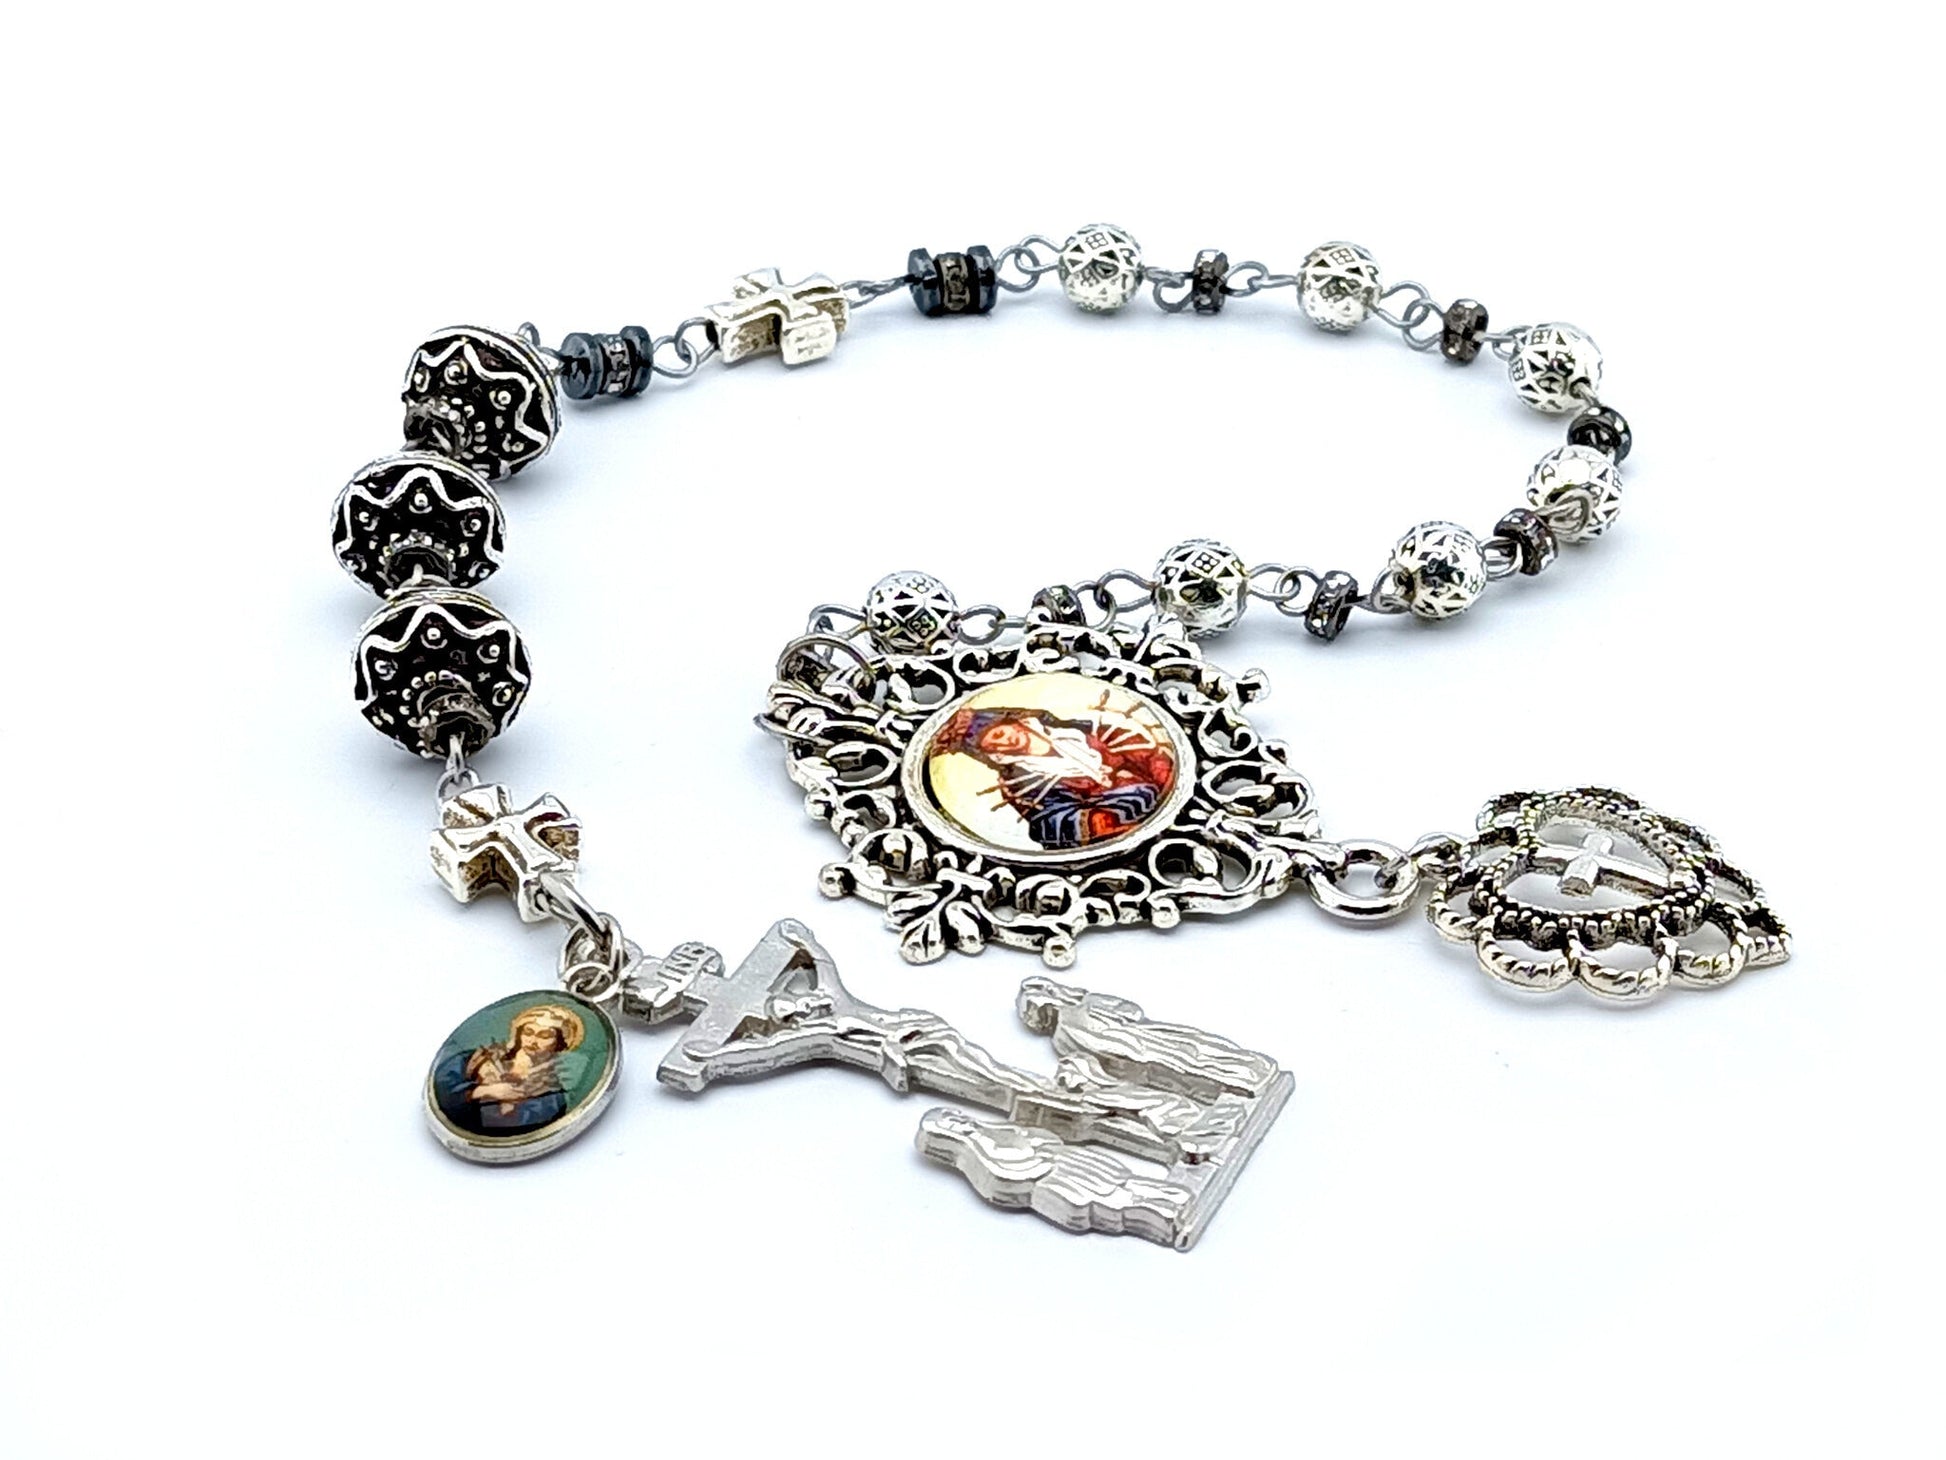 Our Lady of Sorrows unique rosary beads dolor servite rosary with silver metal beads, picture centre medal and two Marys crucifix.